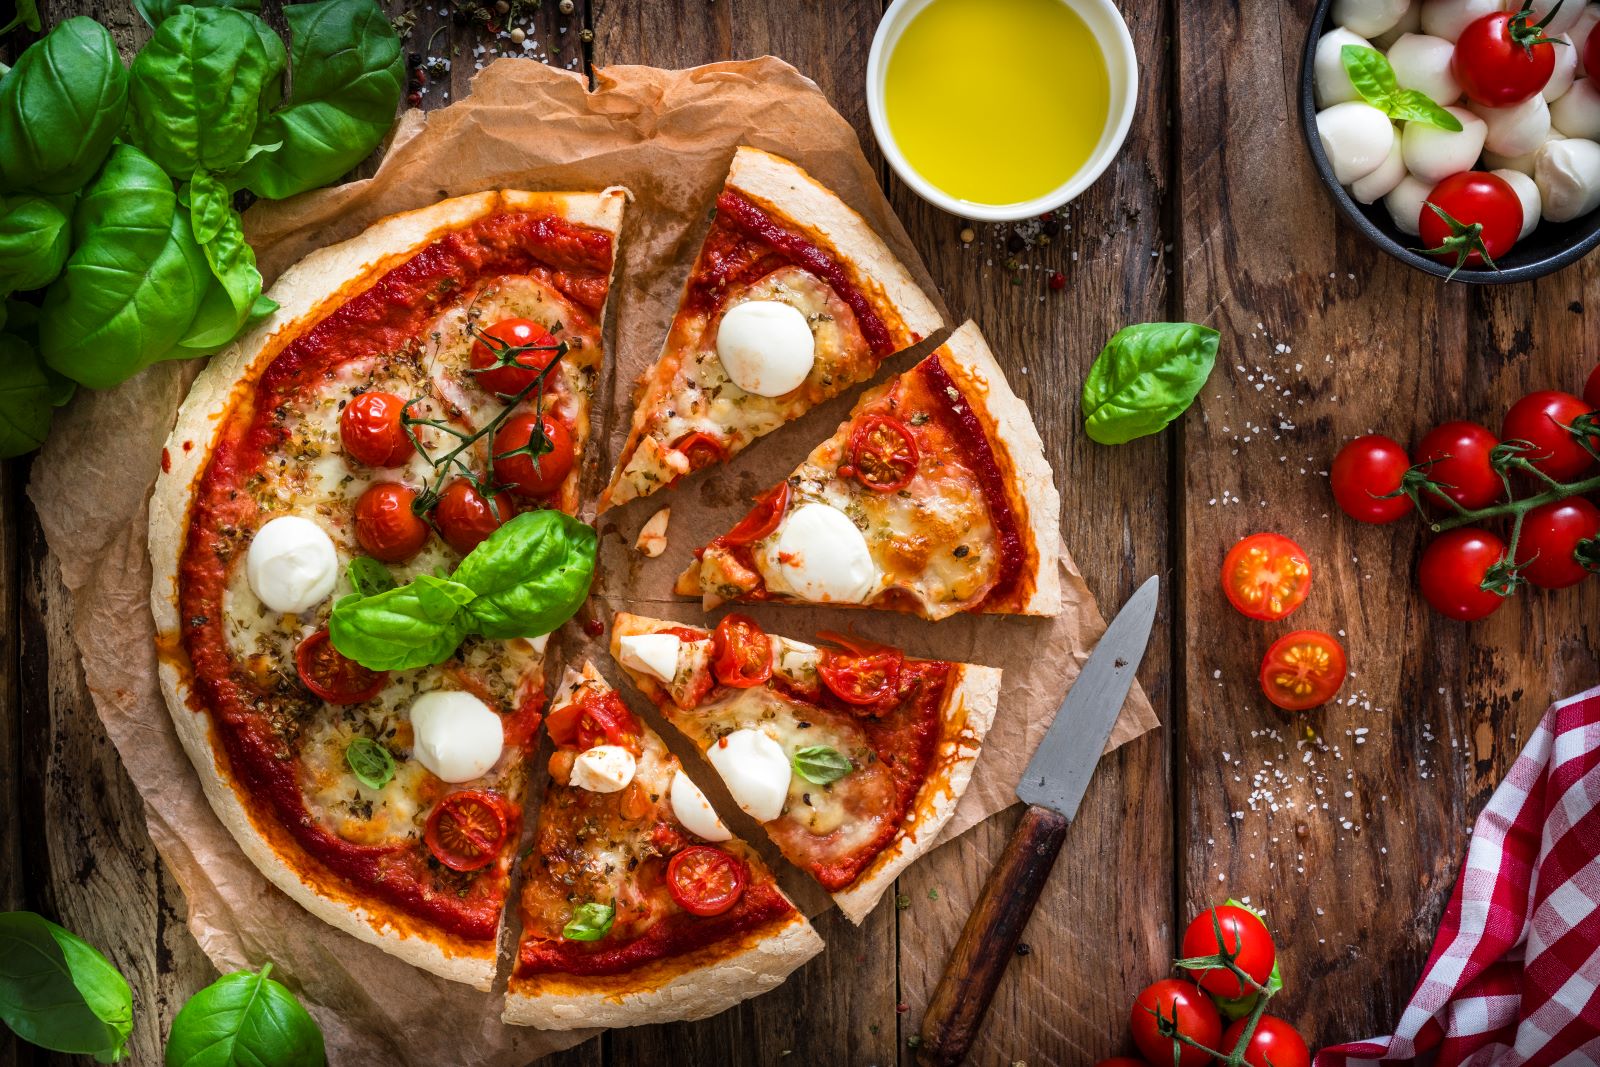 Nutrition Smack Down: Pizza Toppings, Sauces and Crusts